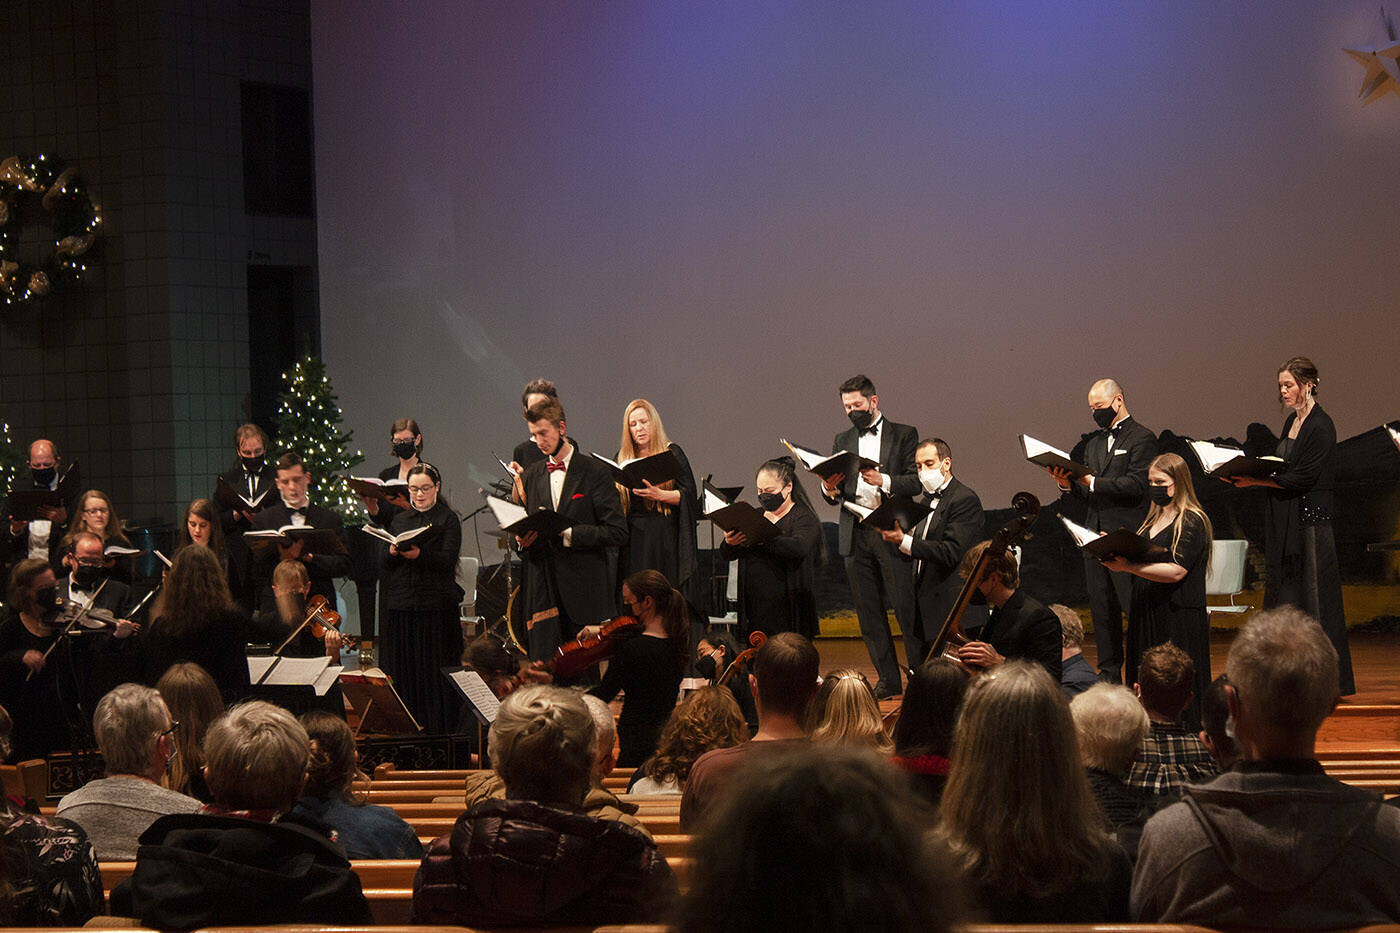 The Chilliwack Symphony Orchestra presents Messiah in the Valley Dec. 9 to 16. (Submitted)